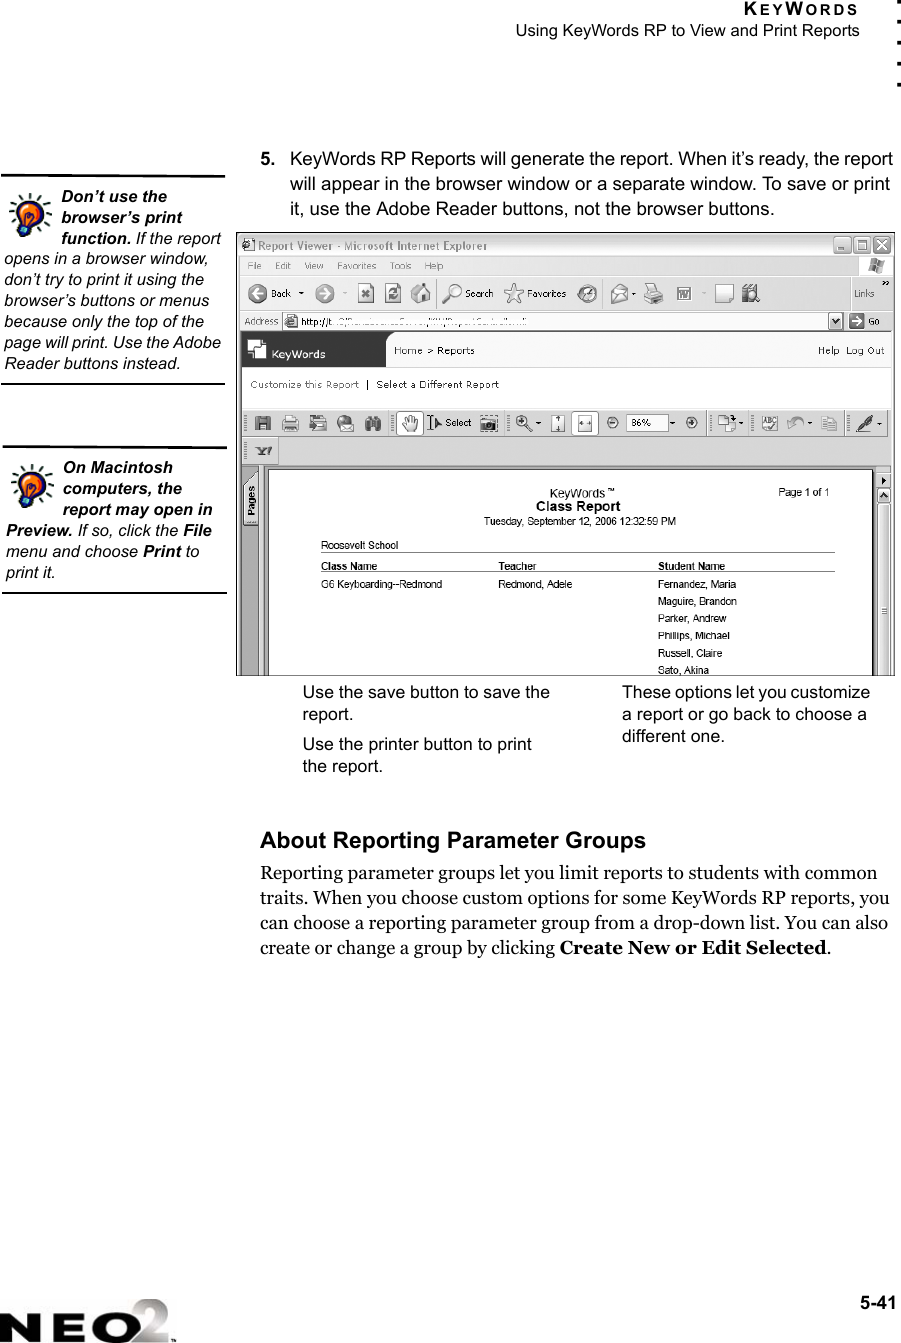 KEYWORDSUsing KeyWords RP to View and Print Reports5-41. . . . .5. KeyWords RP Reports will generate the report. When it’s ready, the report will appear in the browser window or a separate window. To save or print it, use the Adobe Reader buttons, not the browser buttons.About Reporting Parameter GroupsReporting parameter groups let you limit reports to students with common traits. When you choose custom options for some KeyWords RP reports, you can choose a reporting parameter group from a drop-down list. You can also create or change a group by clicking Create New or Edit Selected.Don’t use the browser’s print function. If the report opens in a browser window, don’t try to print it using the browser’s buttons or menus because only the top of the page will print. Use the Adobe Reader buttons instead.On Macintosh computers, the report may open in Preview. If so, click the File menu and choose Print to print it.Use the save button to save the report.Use the printer button to print the report.These options let you customize a report or go back to choose a different one.